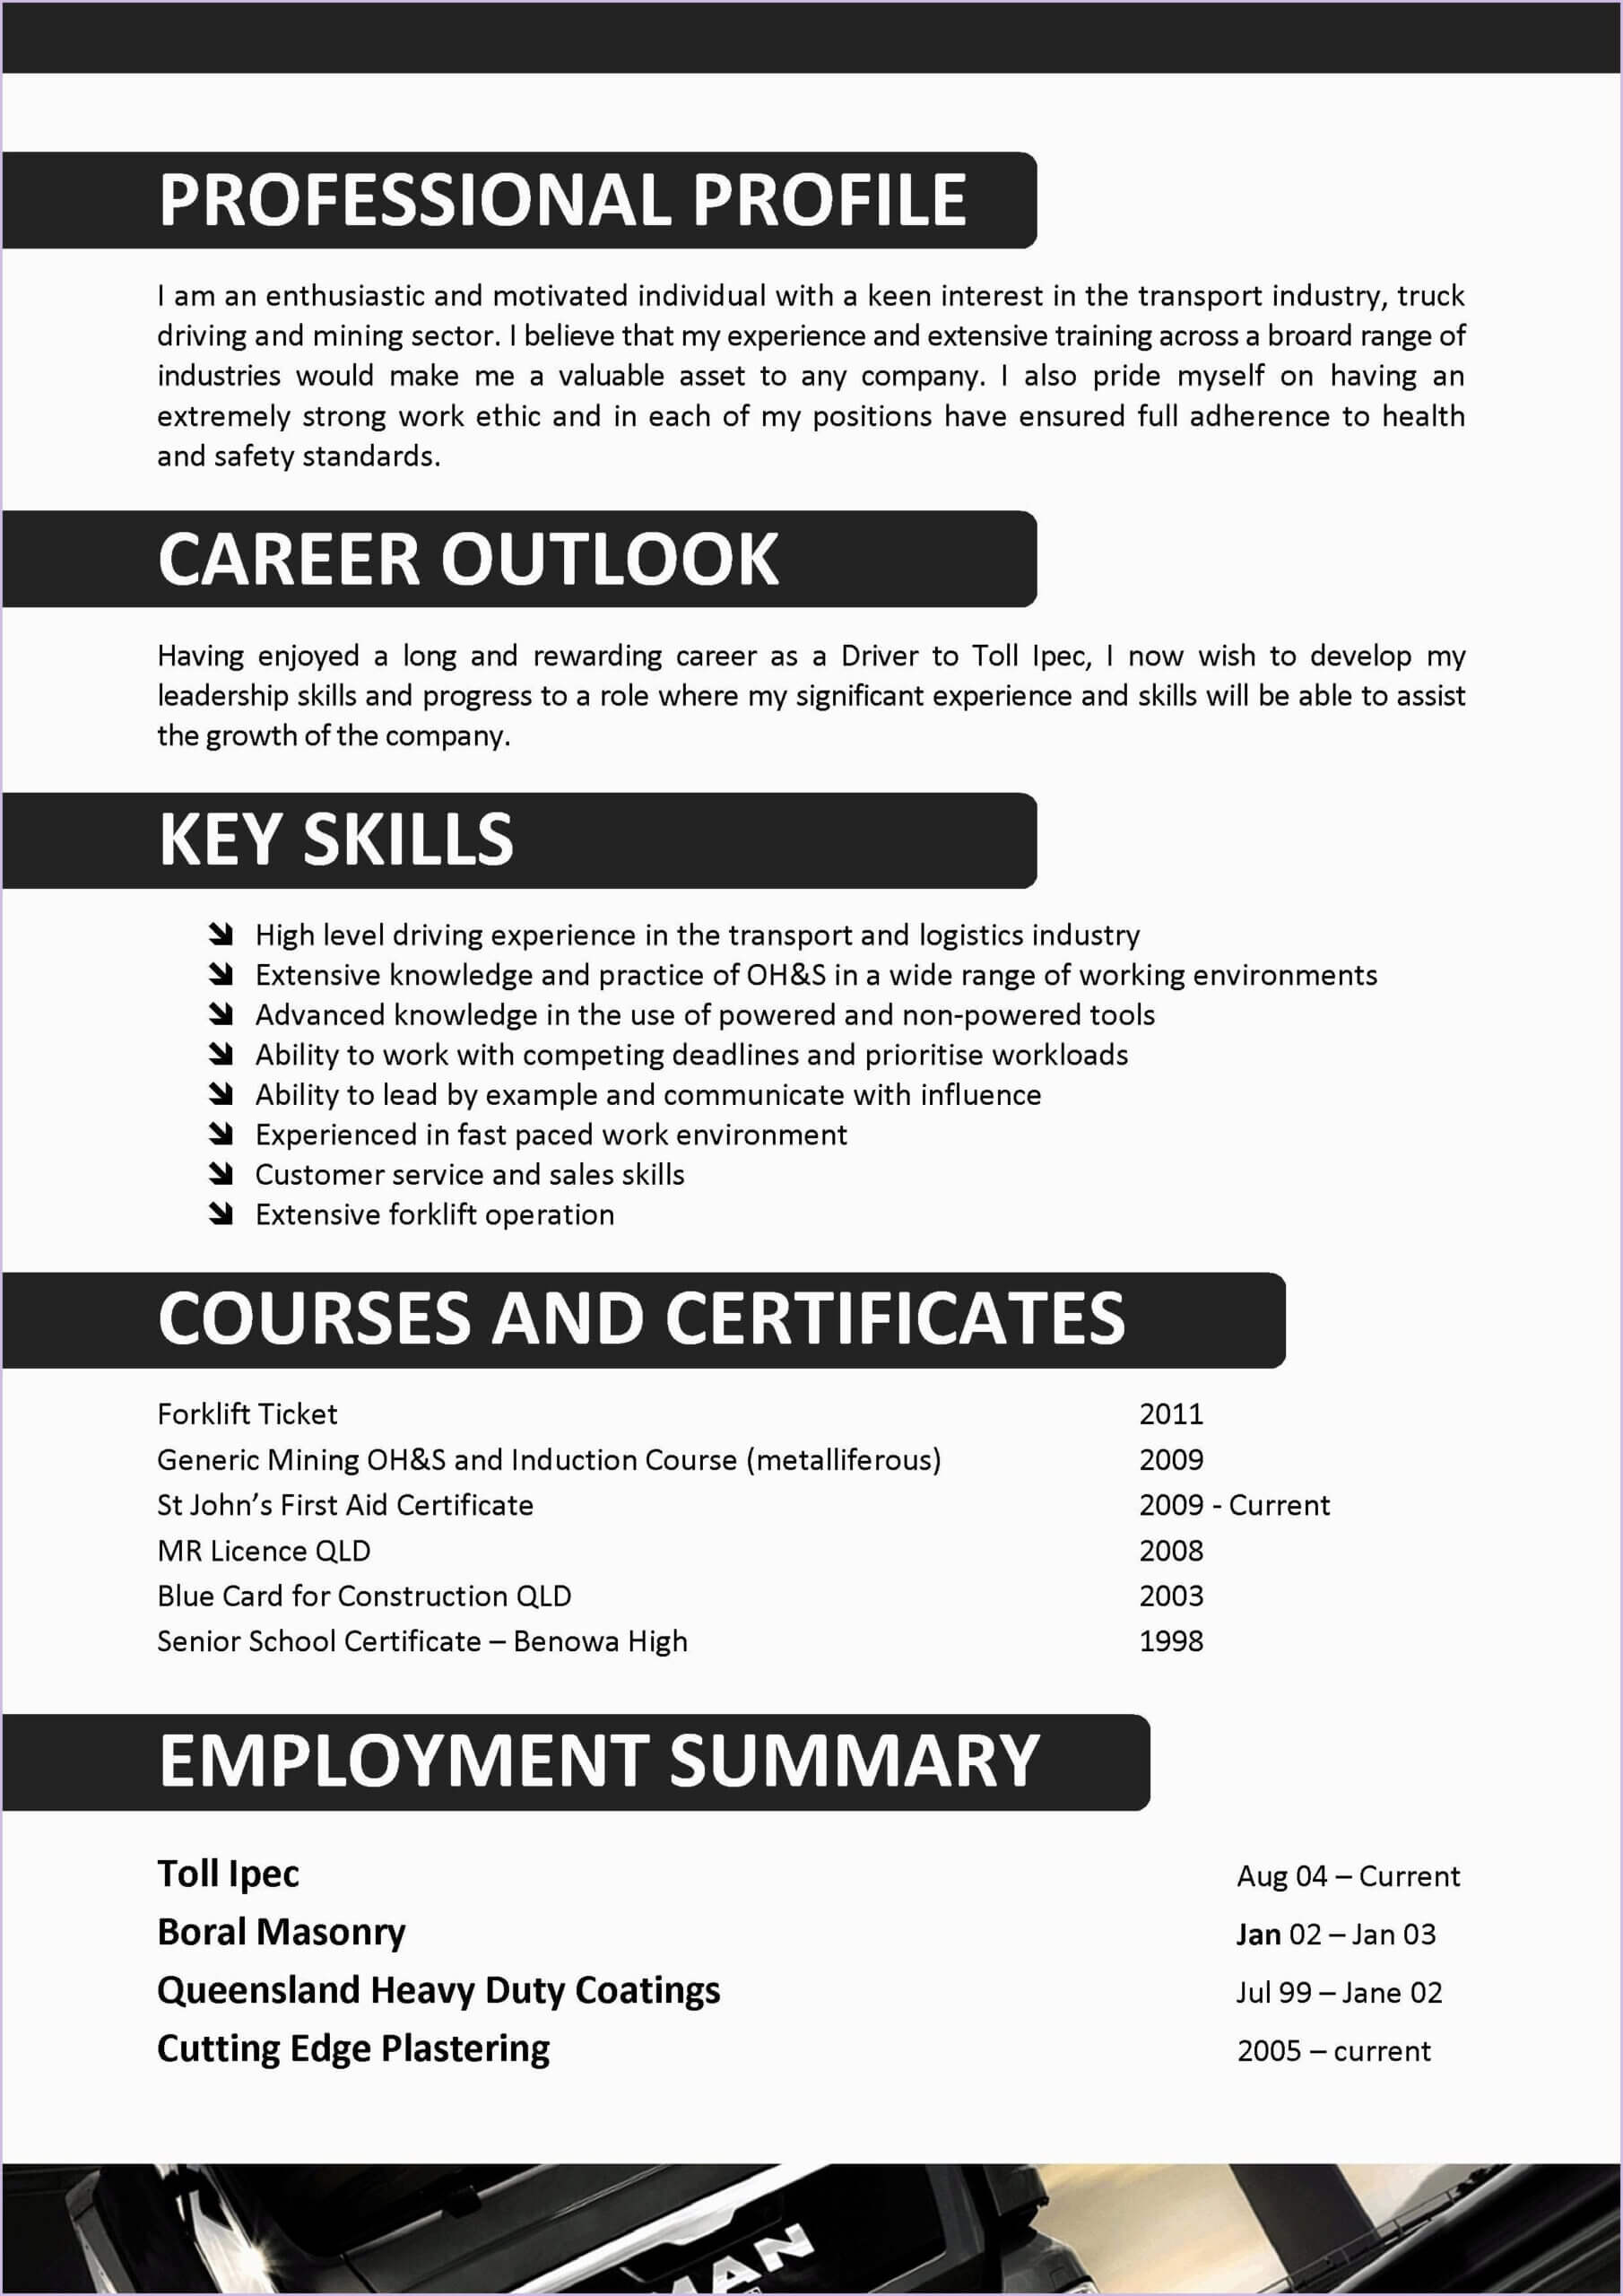 Pin Oleh James Bartion Di Resume Template Download 2019 Throughout Safe Driving Certificate Template